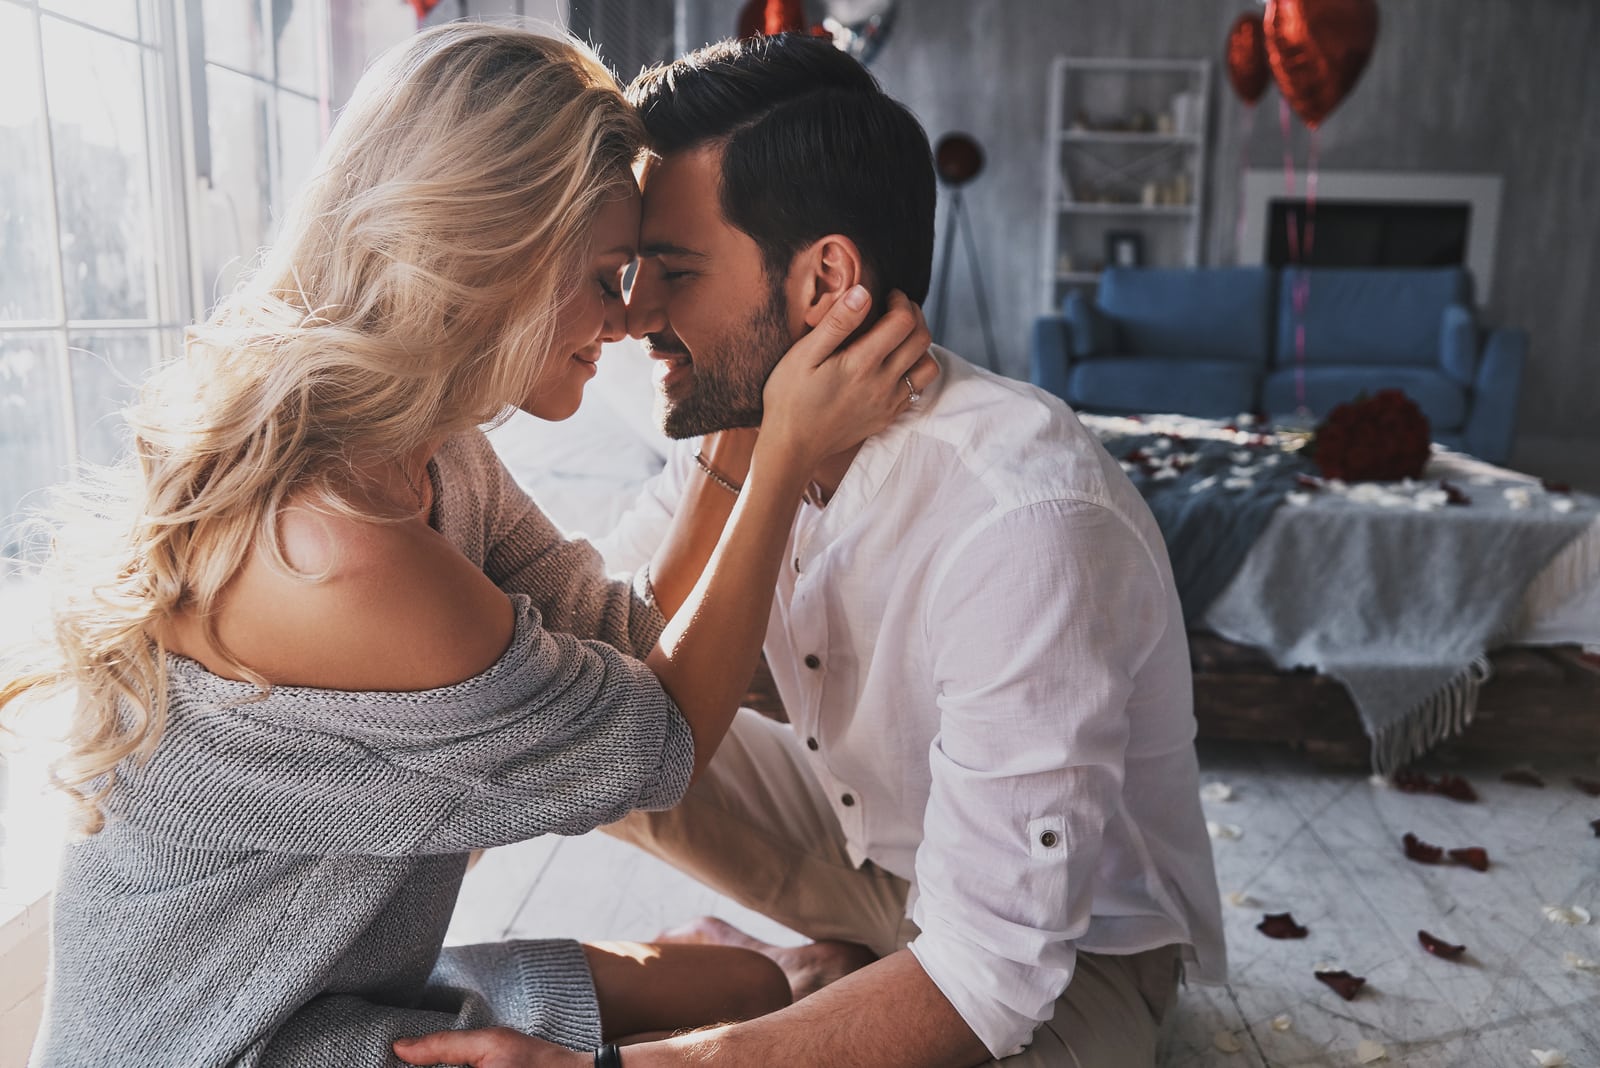 40 Signs That Tell You He Is Your Forever Person